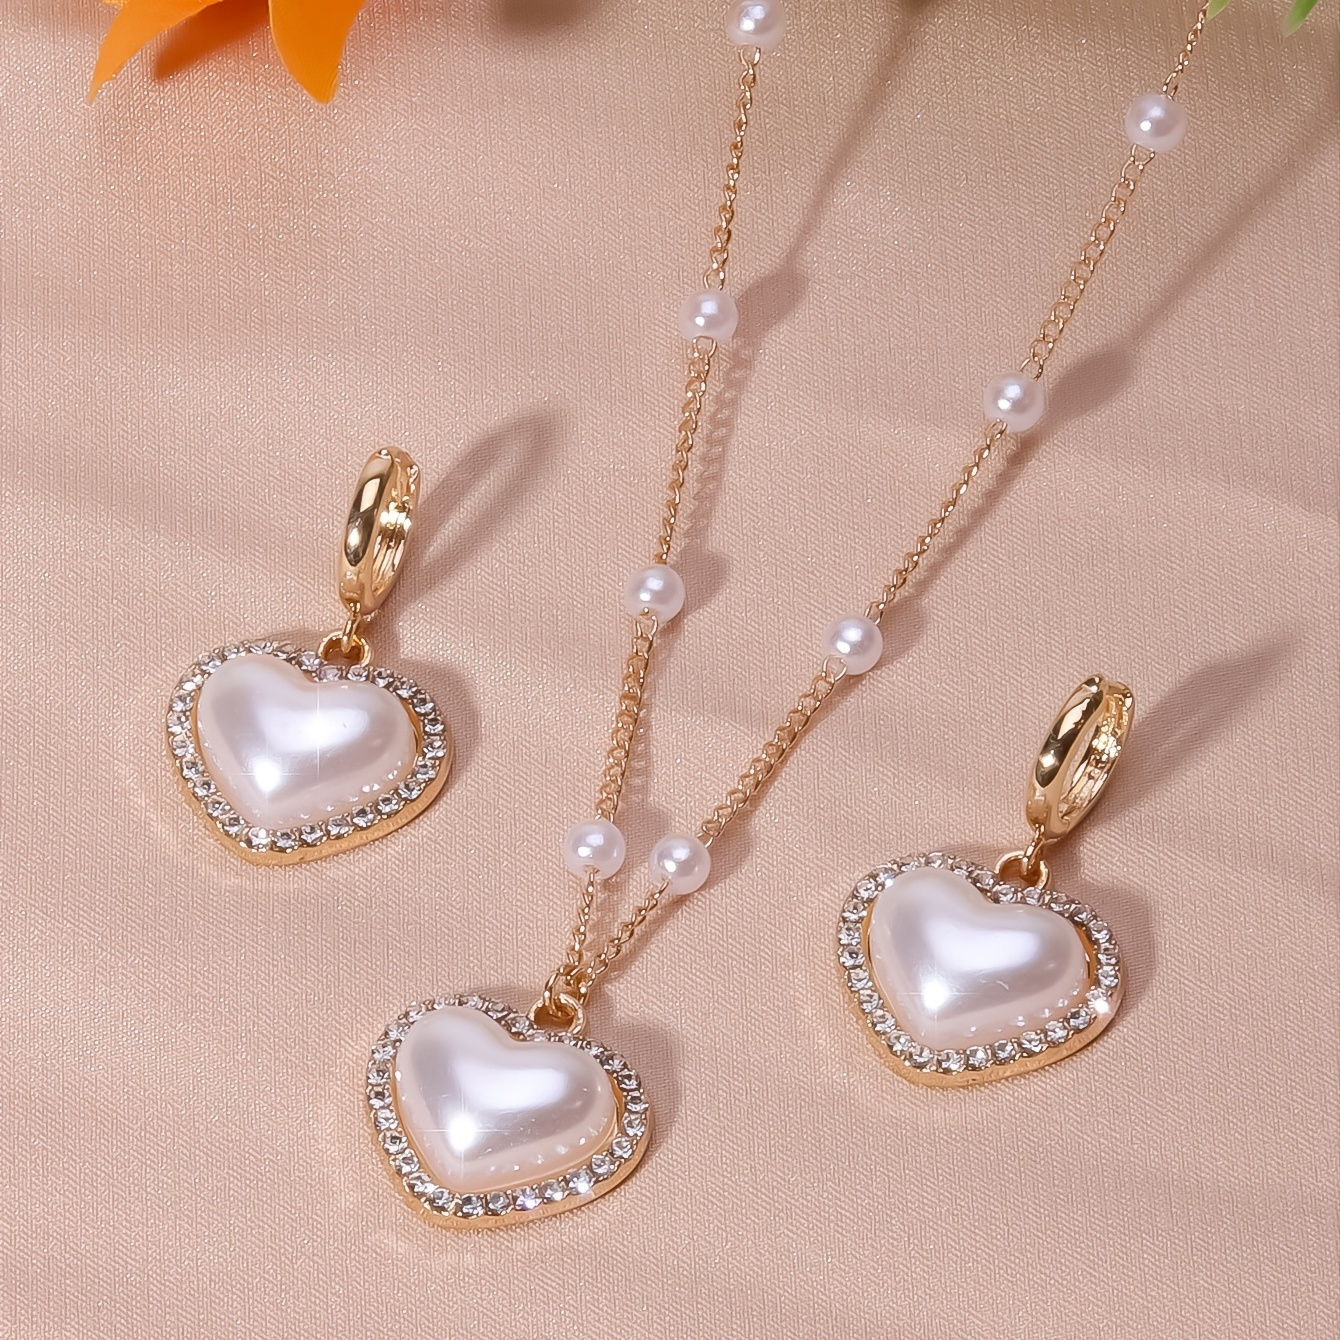 

Heart Shape Faux Pearls Jewelry Set With Pendant Necklace & Drop Earrings Inlaid Shiny Rhinestones Elegant Jewelry Set